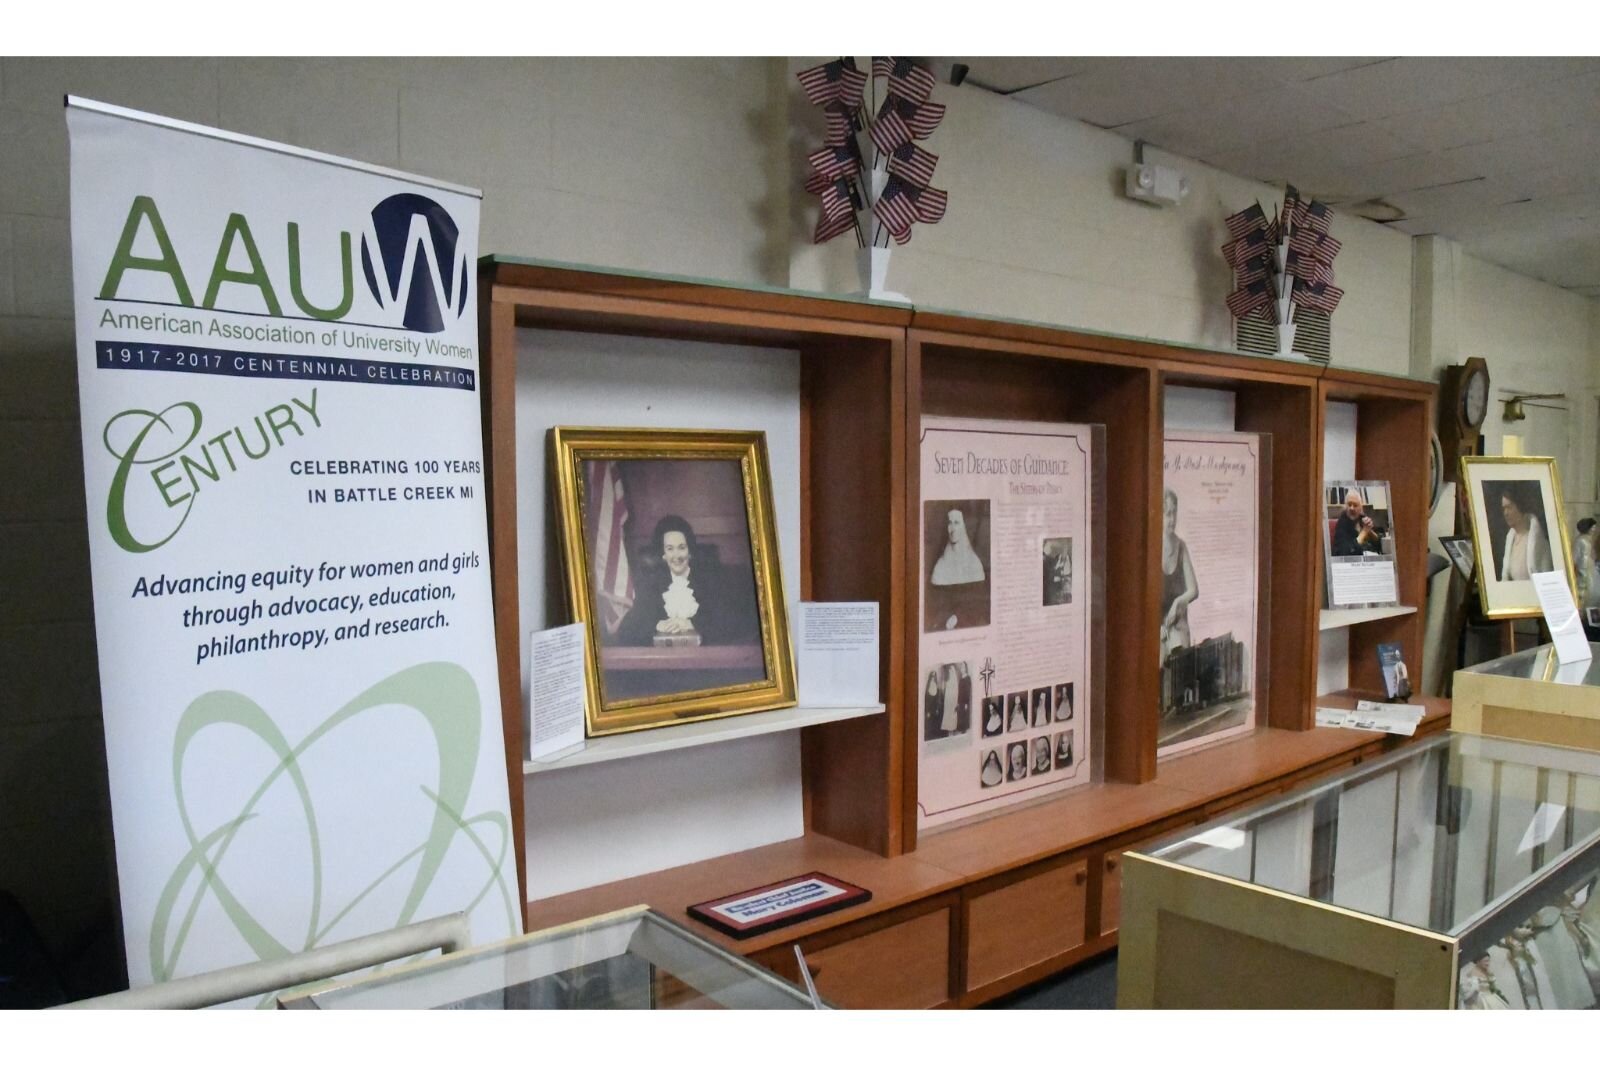 Part of the display of the American Association of University Women (AAUW) at the Battle Creek Regional History Museum.